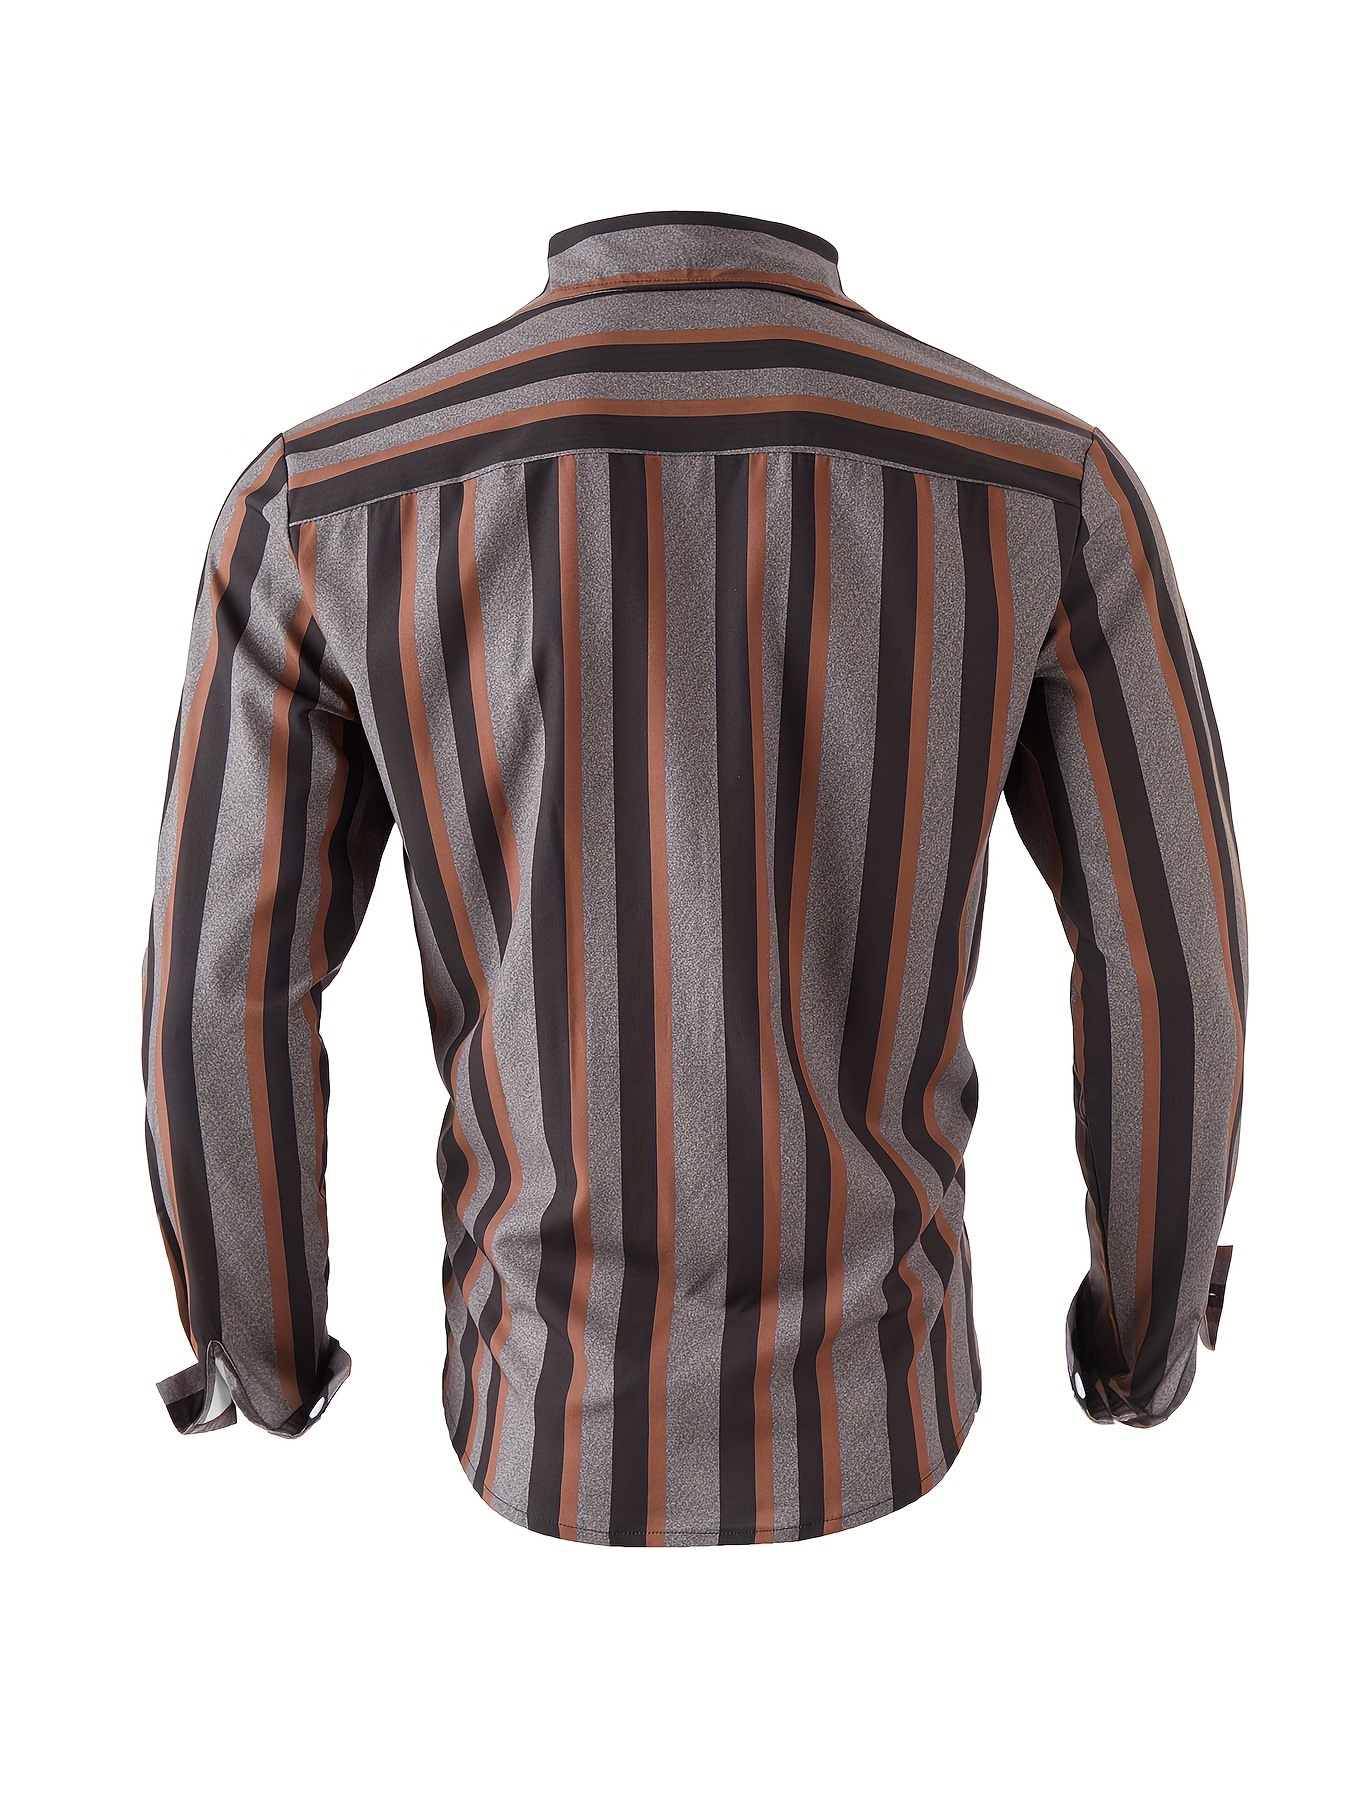 mens classic design striped long sleeve button up shirt for business occasions spring fall mens clothing details 1